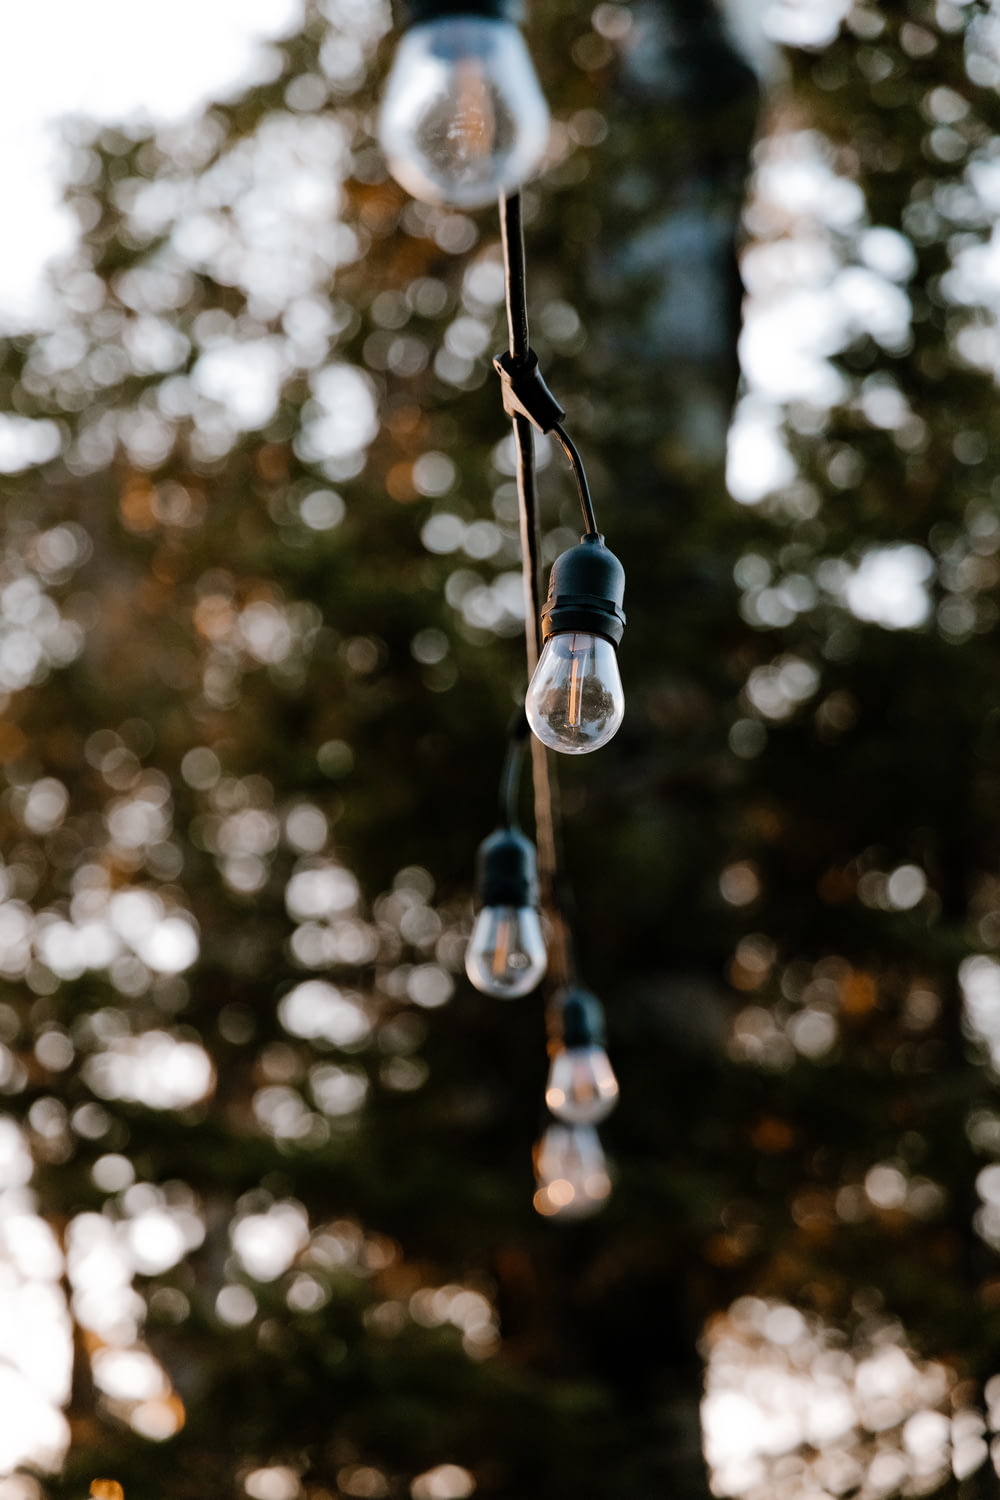 a bunch of light bulbs hanging from a tree